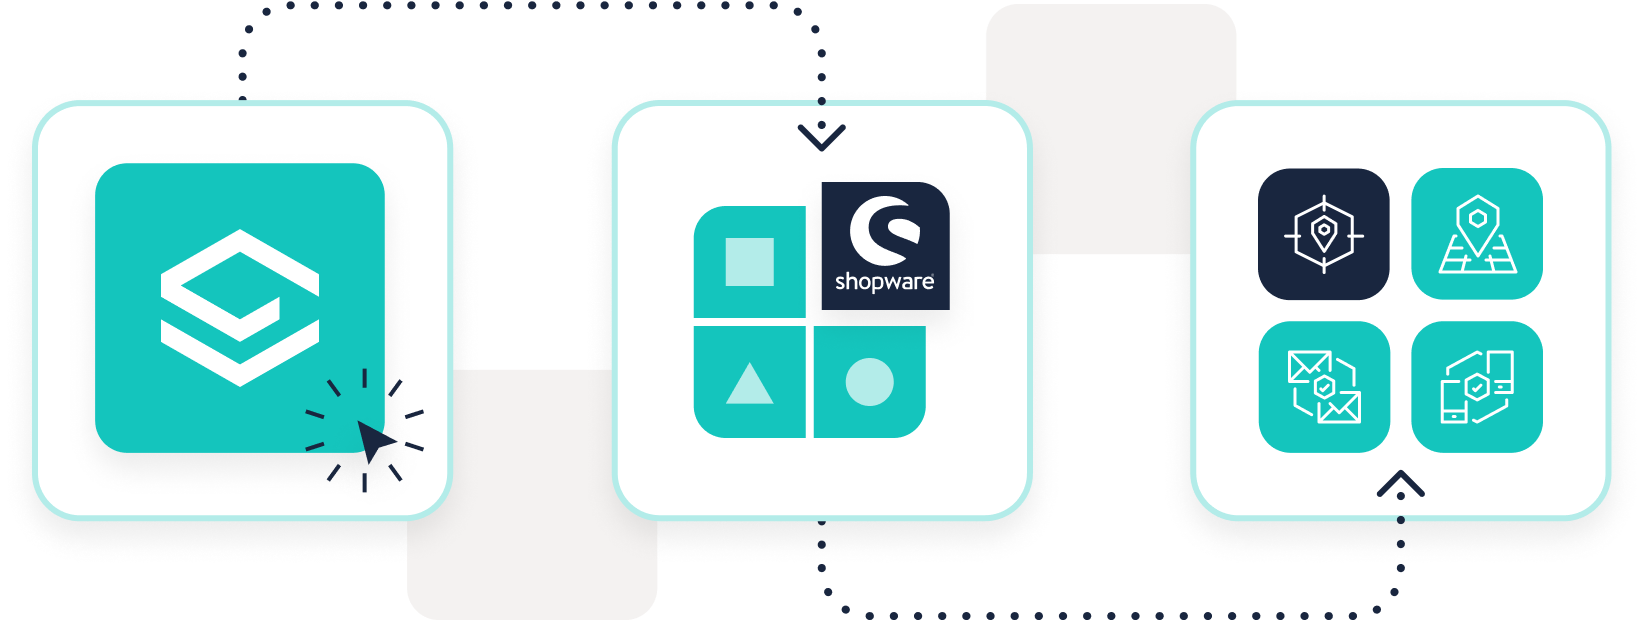 Get started with Shopware integration